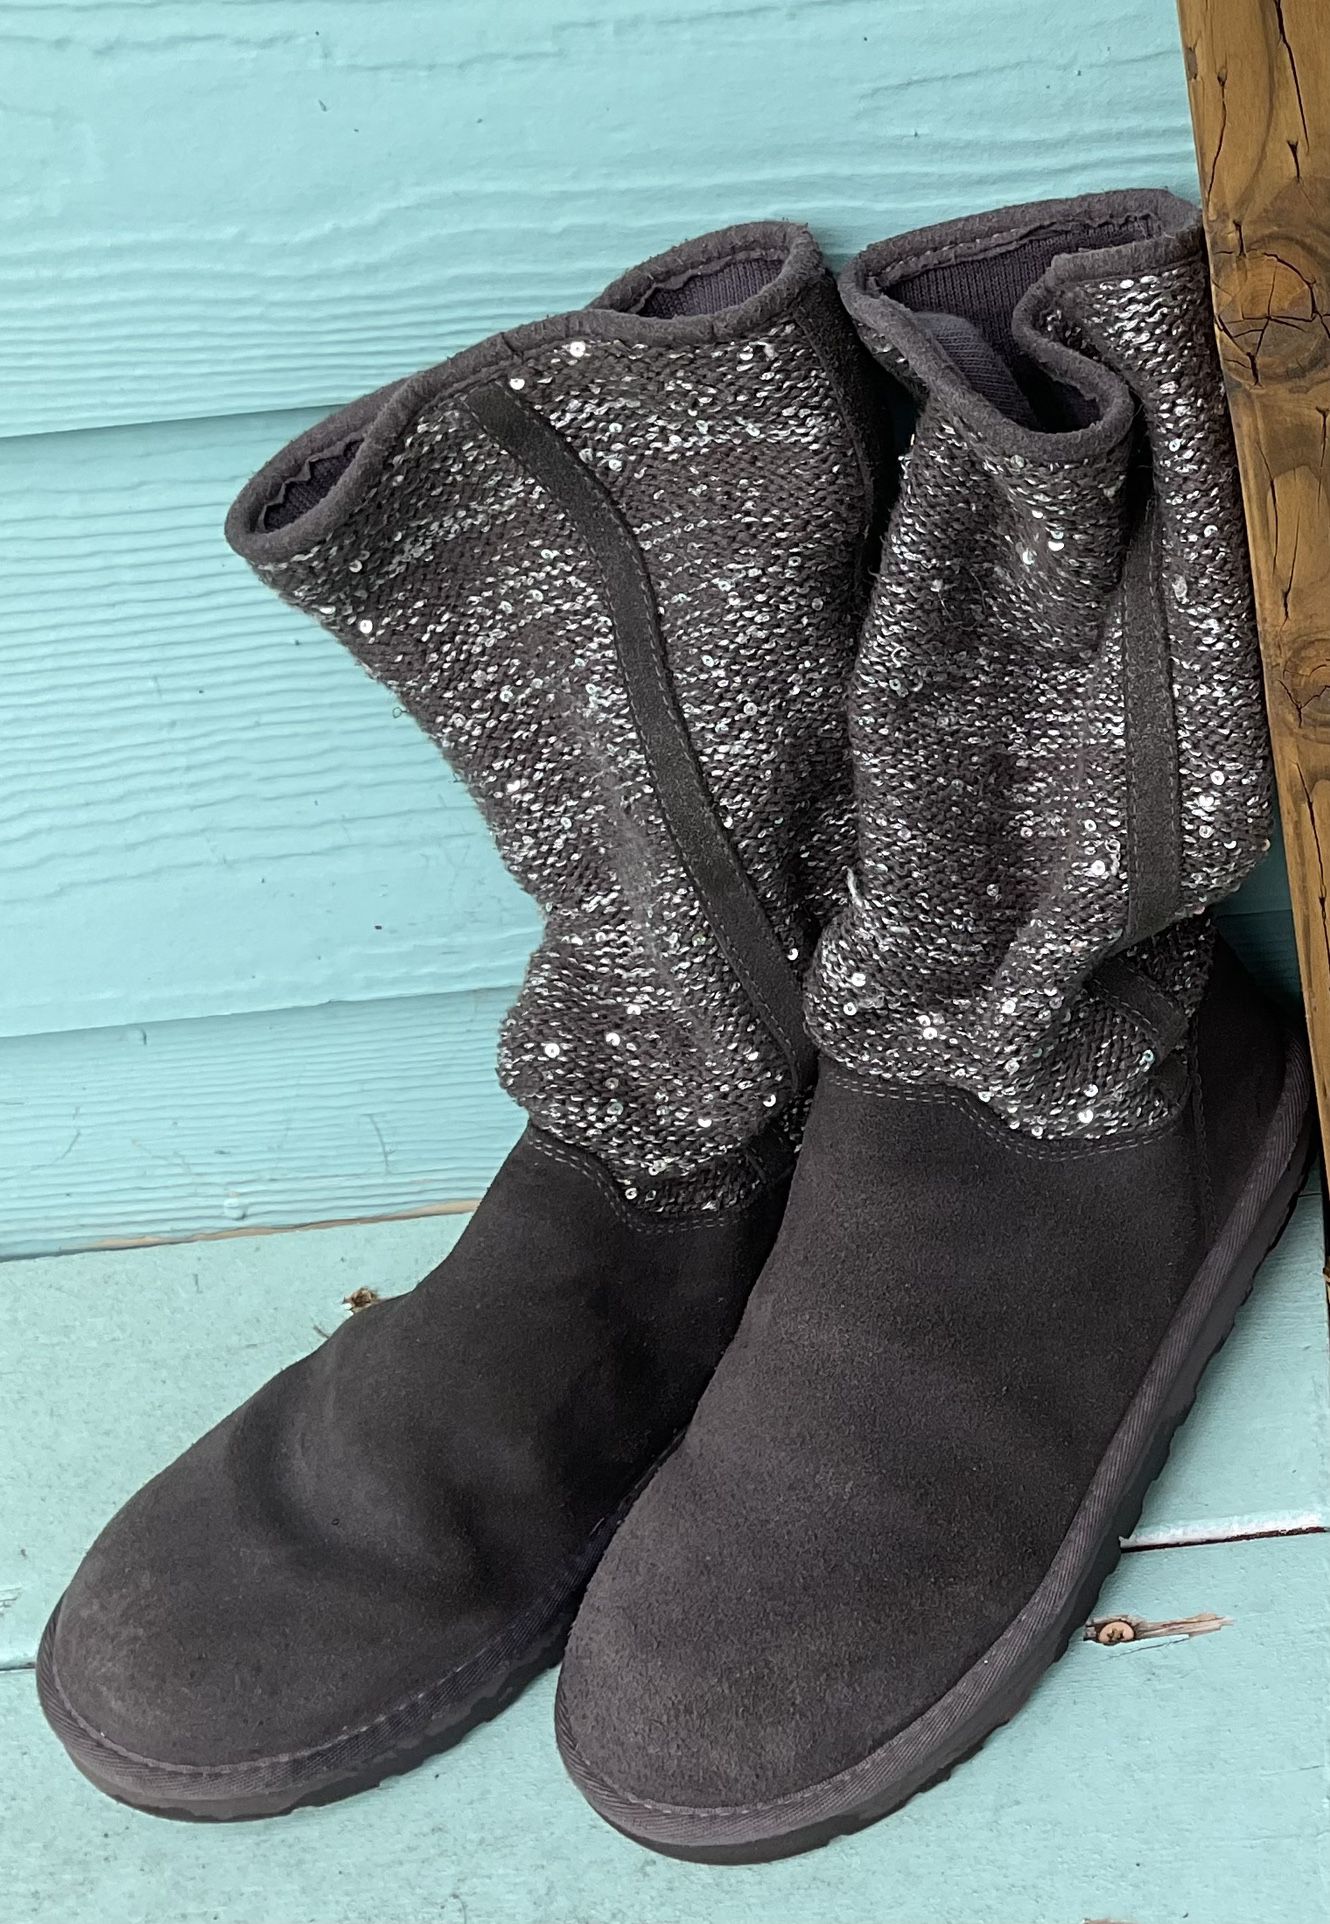 Sequined UGG Slouchy Knit Boots